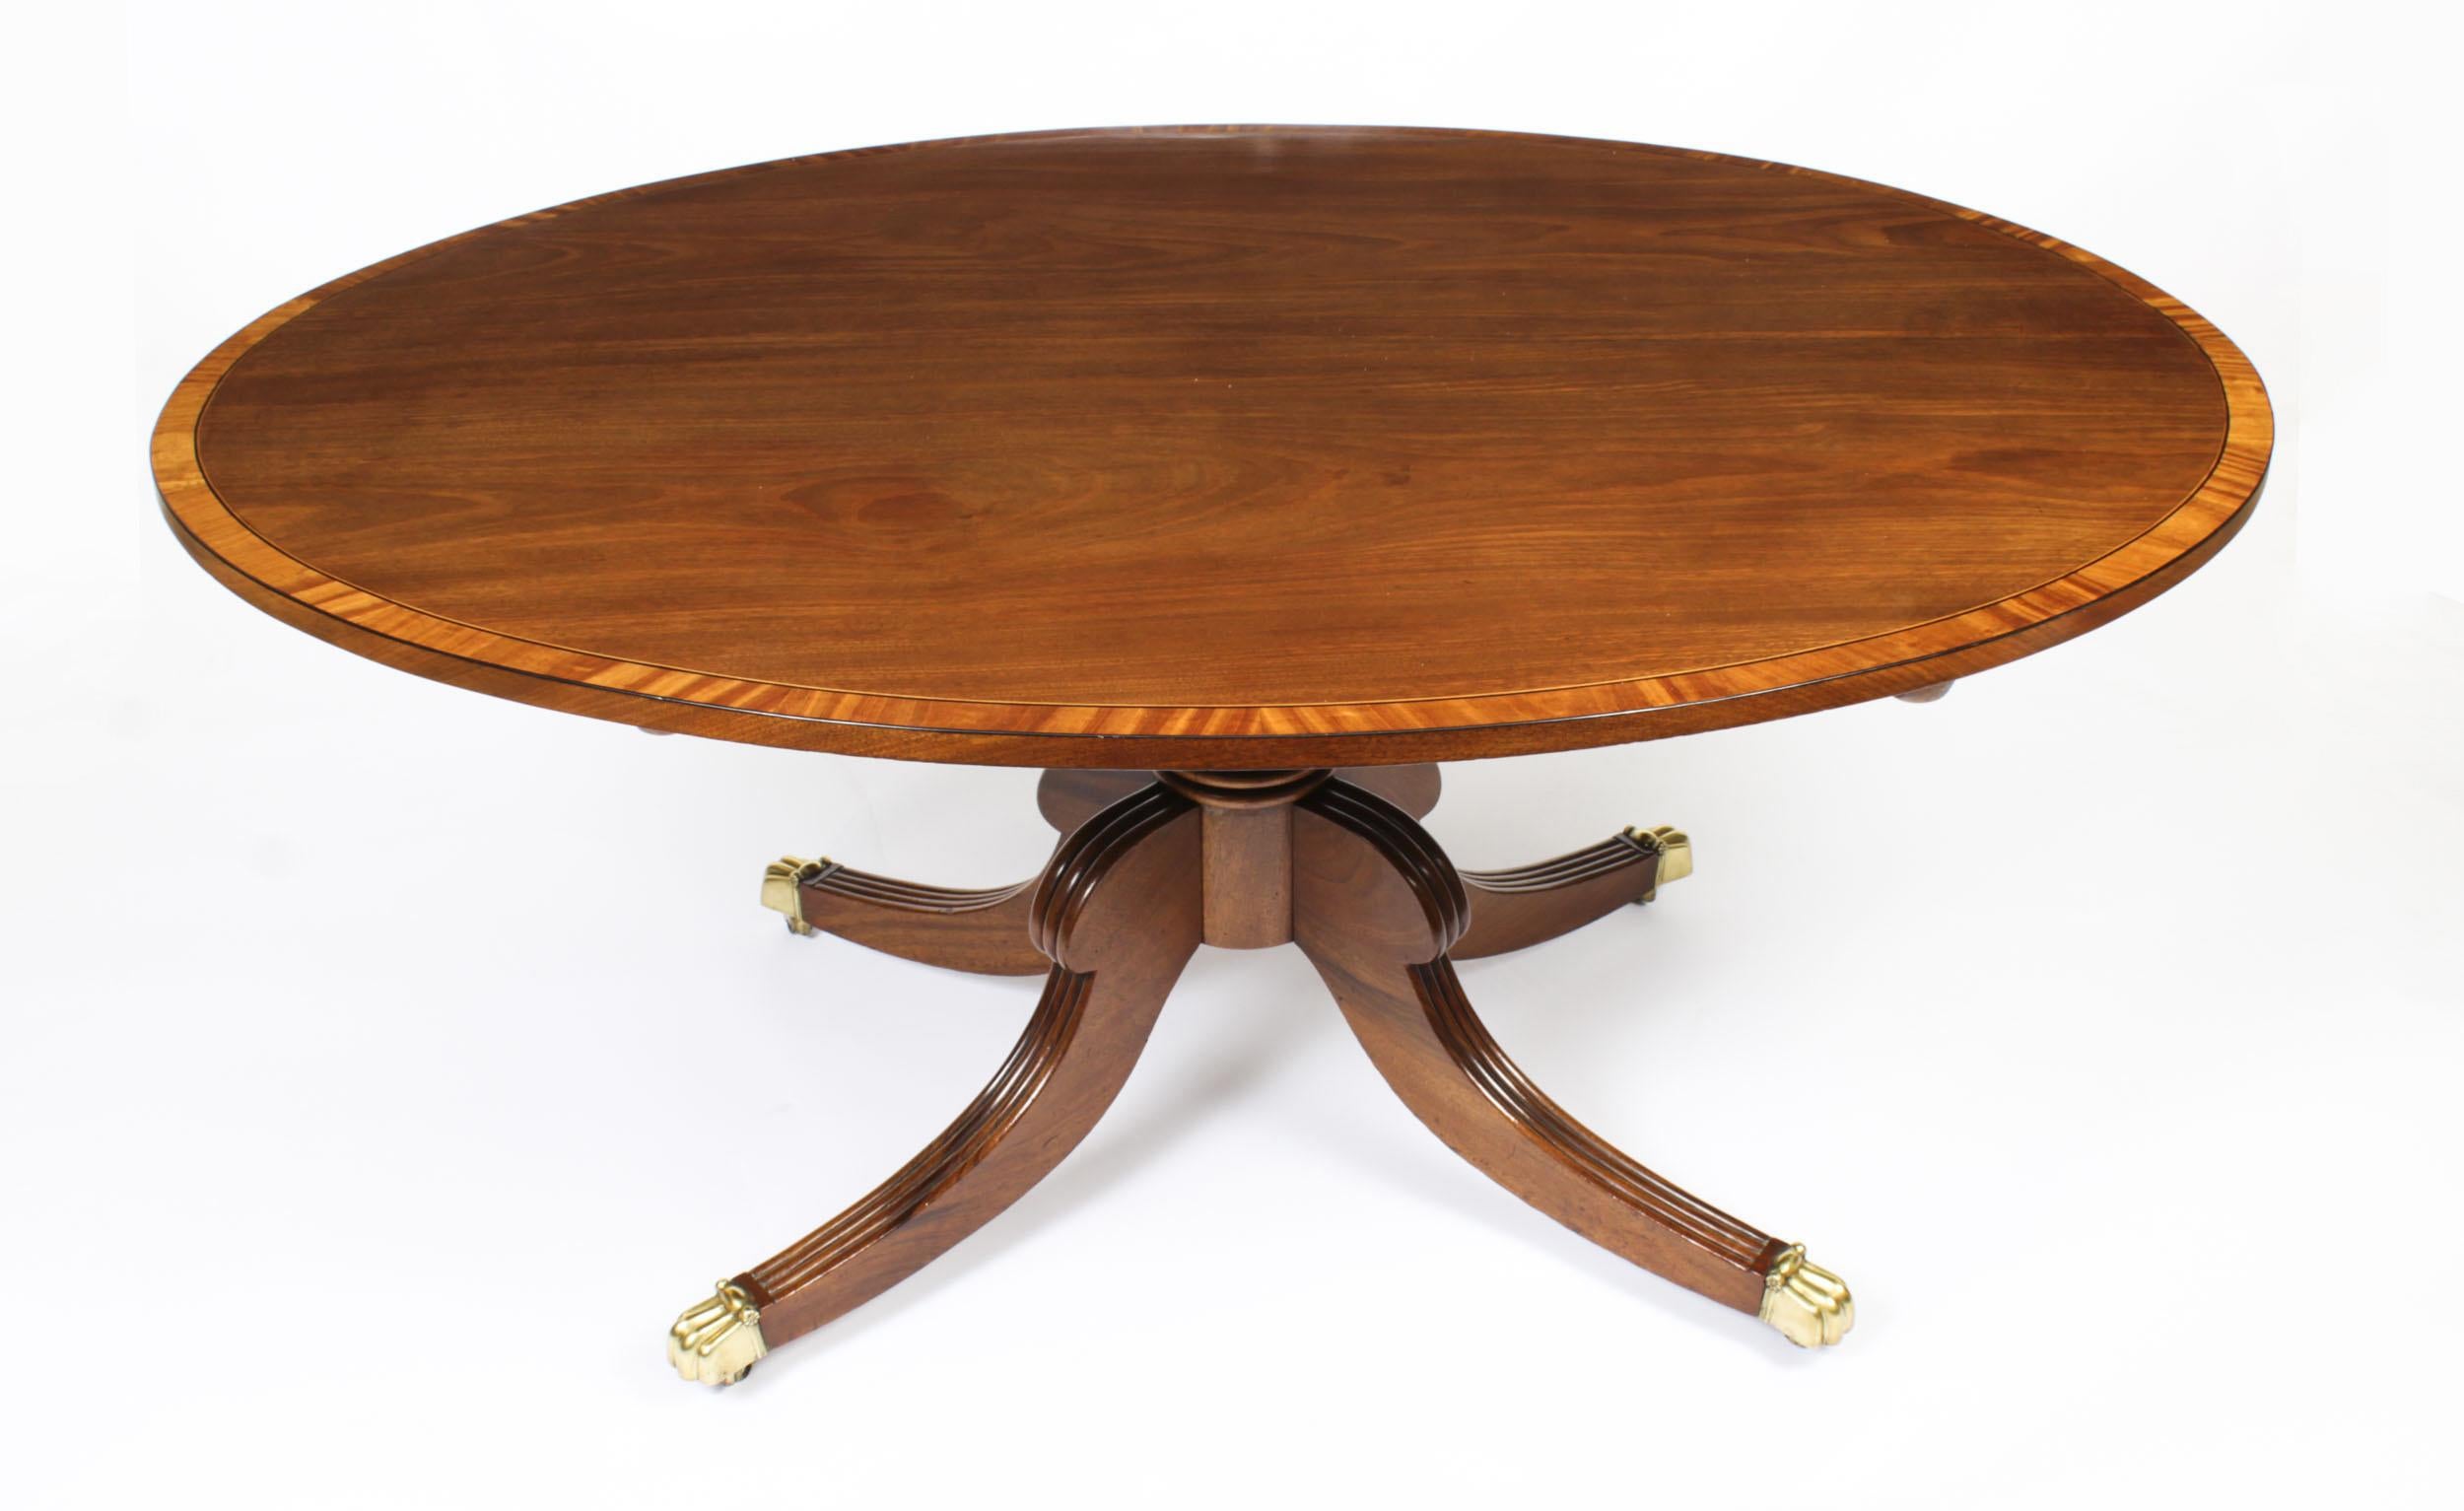 This is a beautiful antique Regency flame mahogany and Satinwood banded tilt top oval dining table dating from circa 1820 with a set of six Regency Revival dining chairs dating from the 20th century.

The fabulous 5ft flame mahogany tilt top table